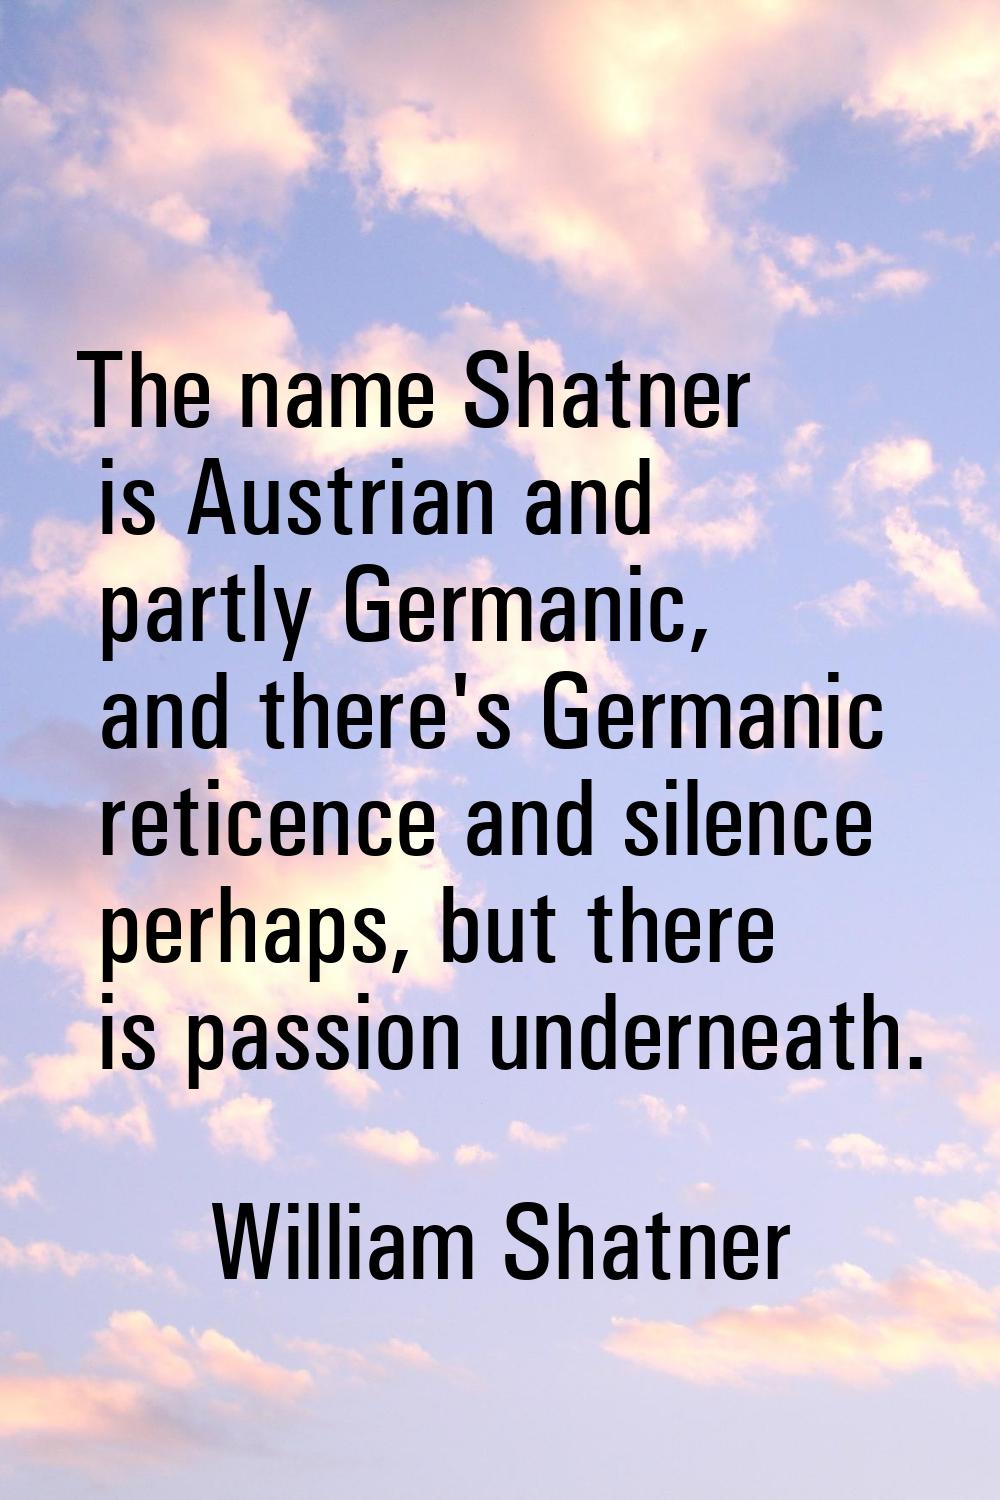 The name Shatner is Austrian and partly Germanic, and there's Germanic reticence and silence perhap